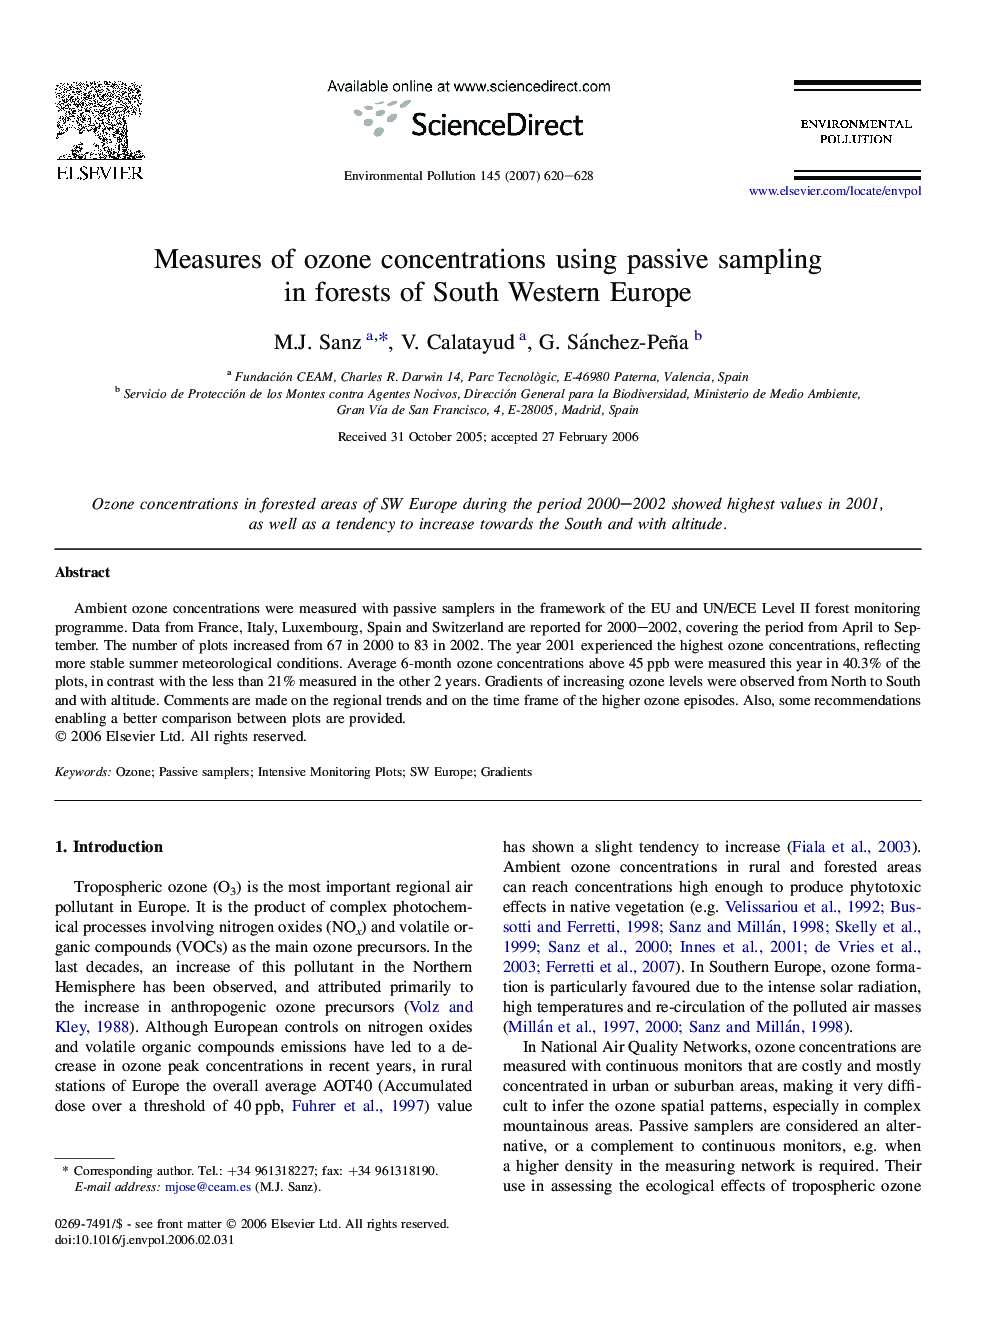 Measures of ozone concentrations using passive sampling in forests of South Western Europe